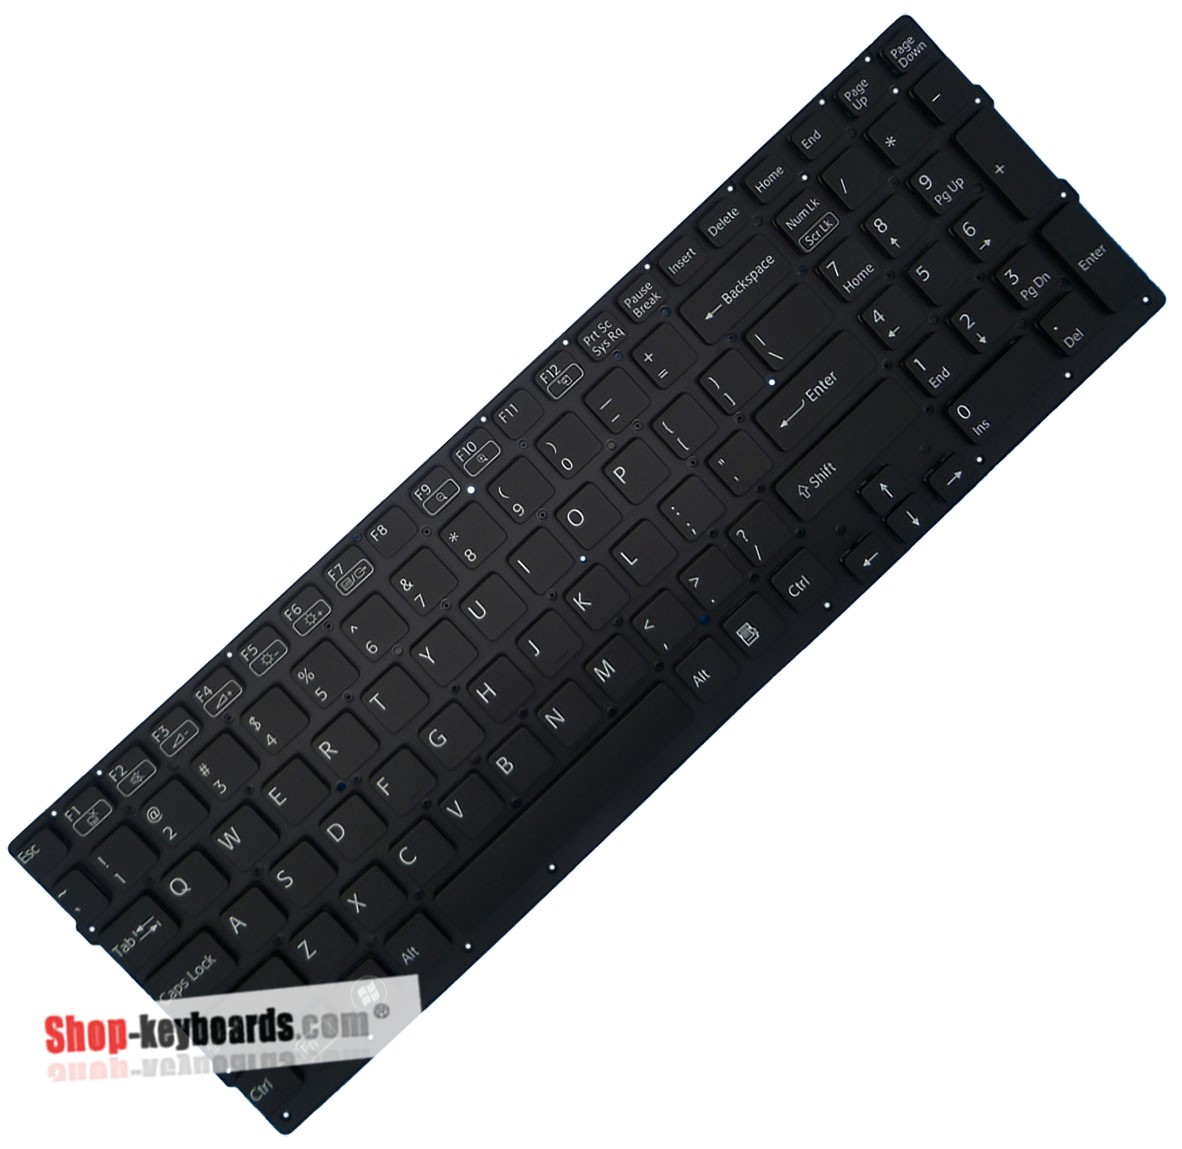 Sony 55010S3E2G0-035-G Keyboard replacement